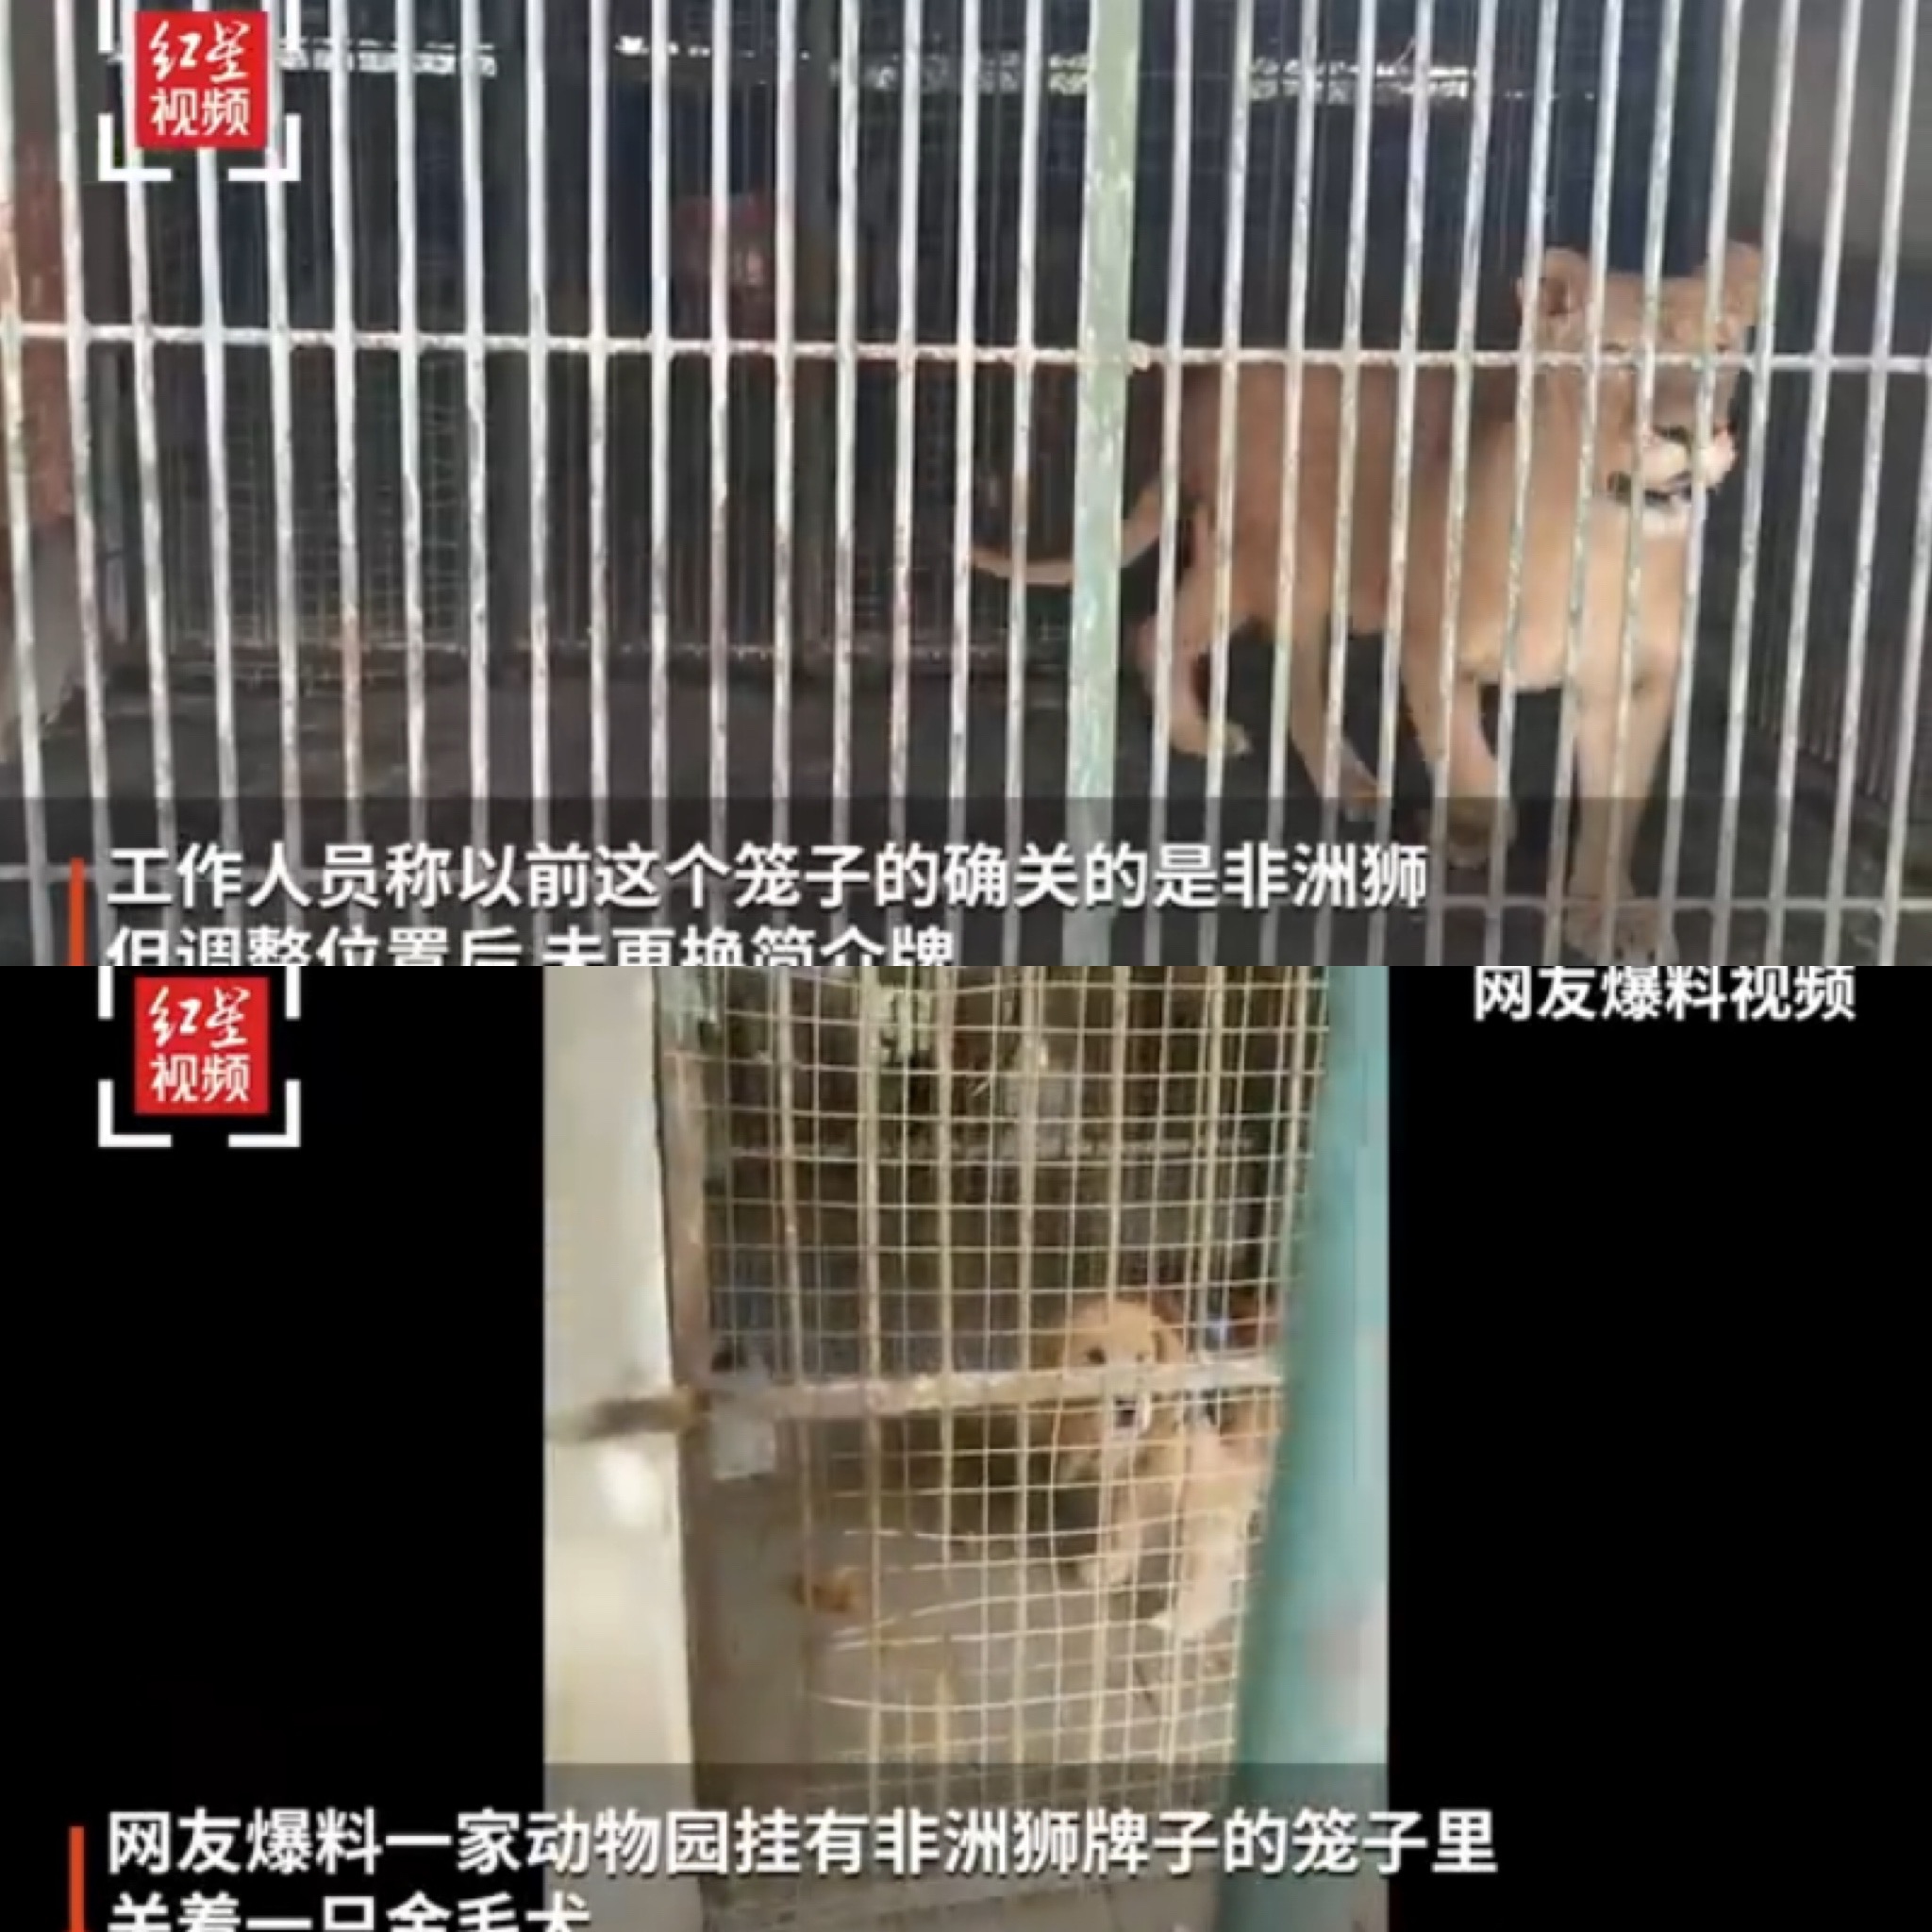 A lion and a dog at the zoo Photo: screenshot of video posted on Sina Weibo 